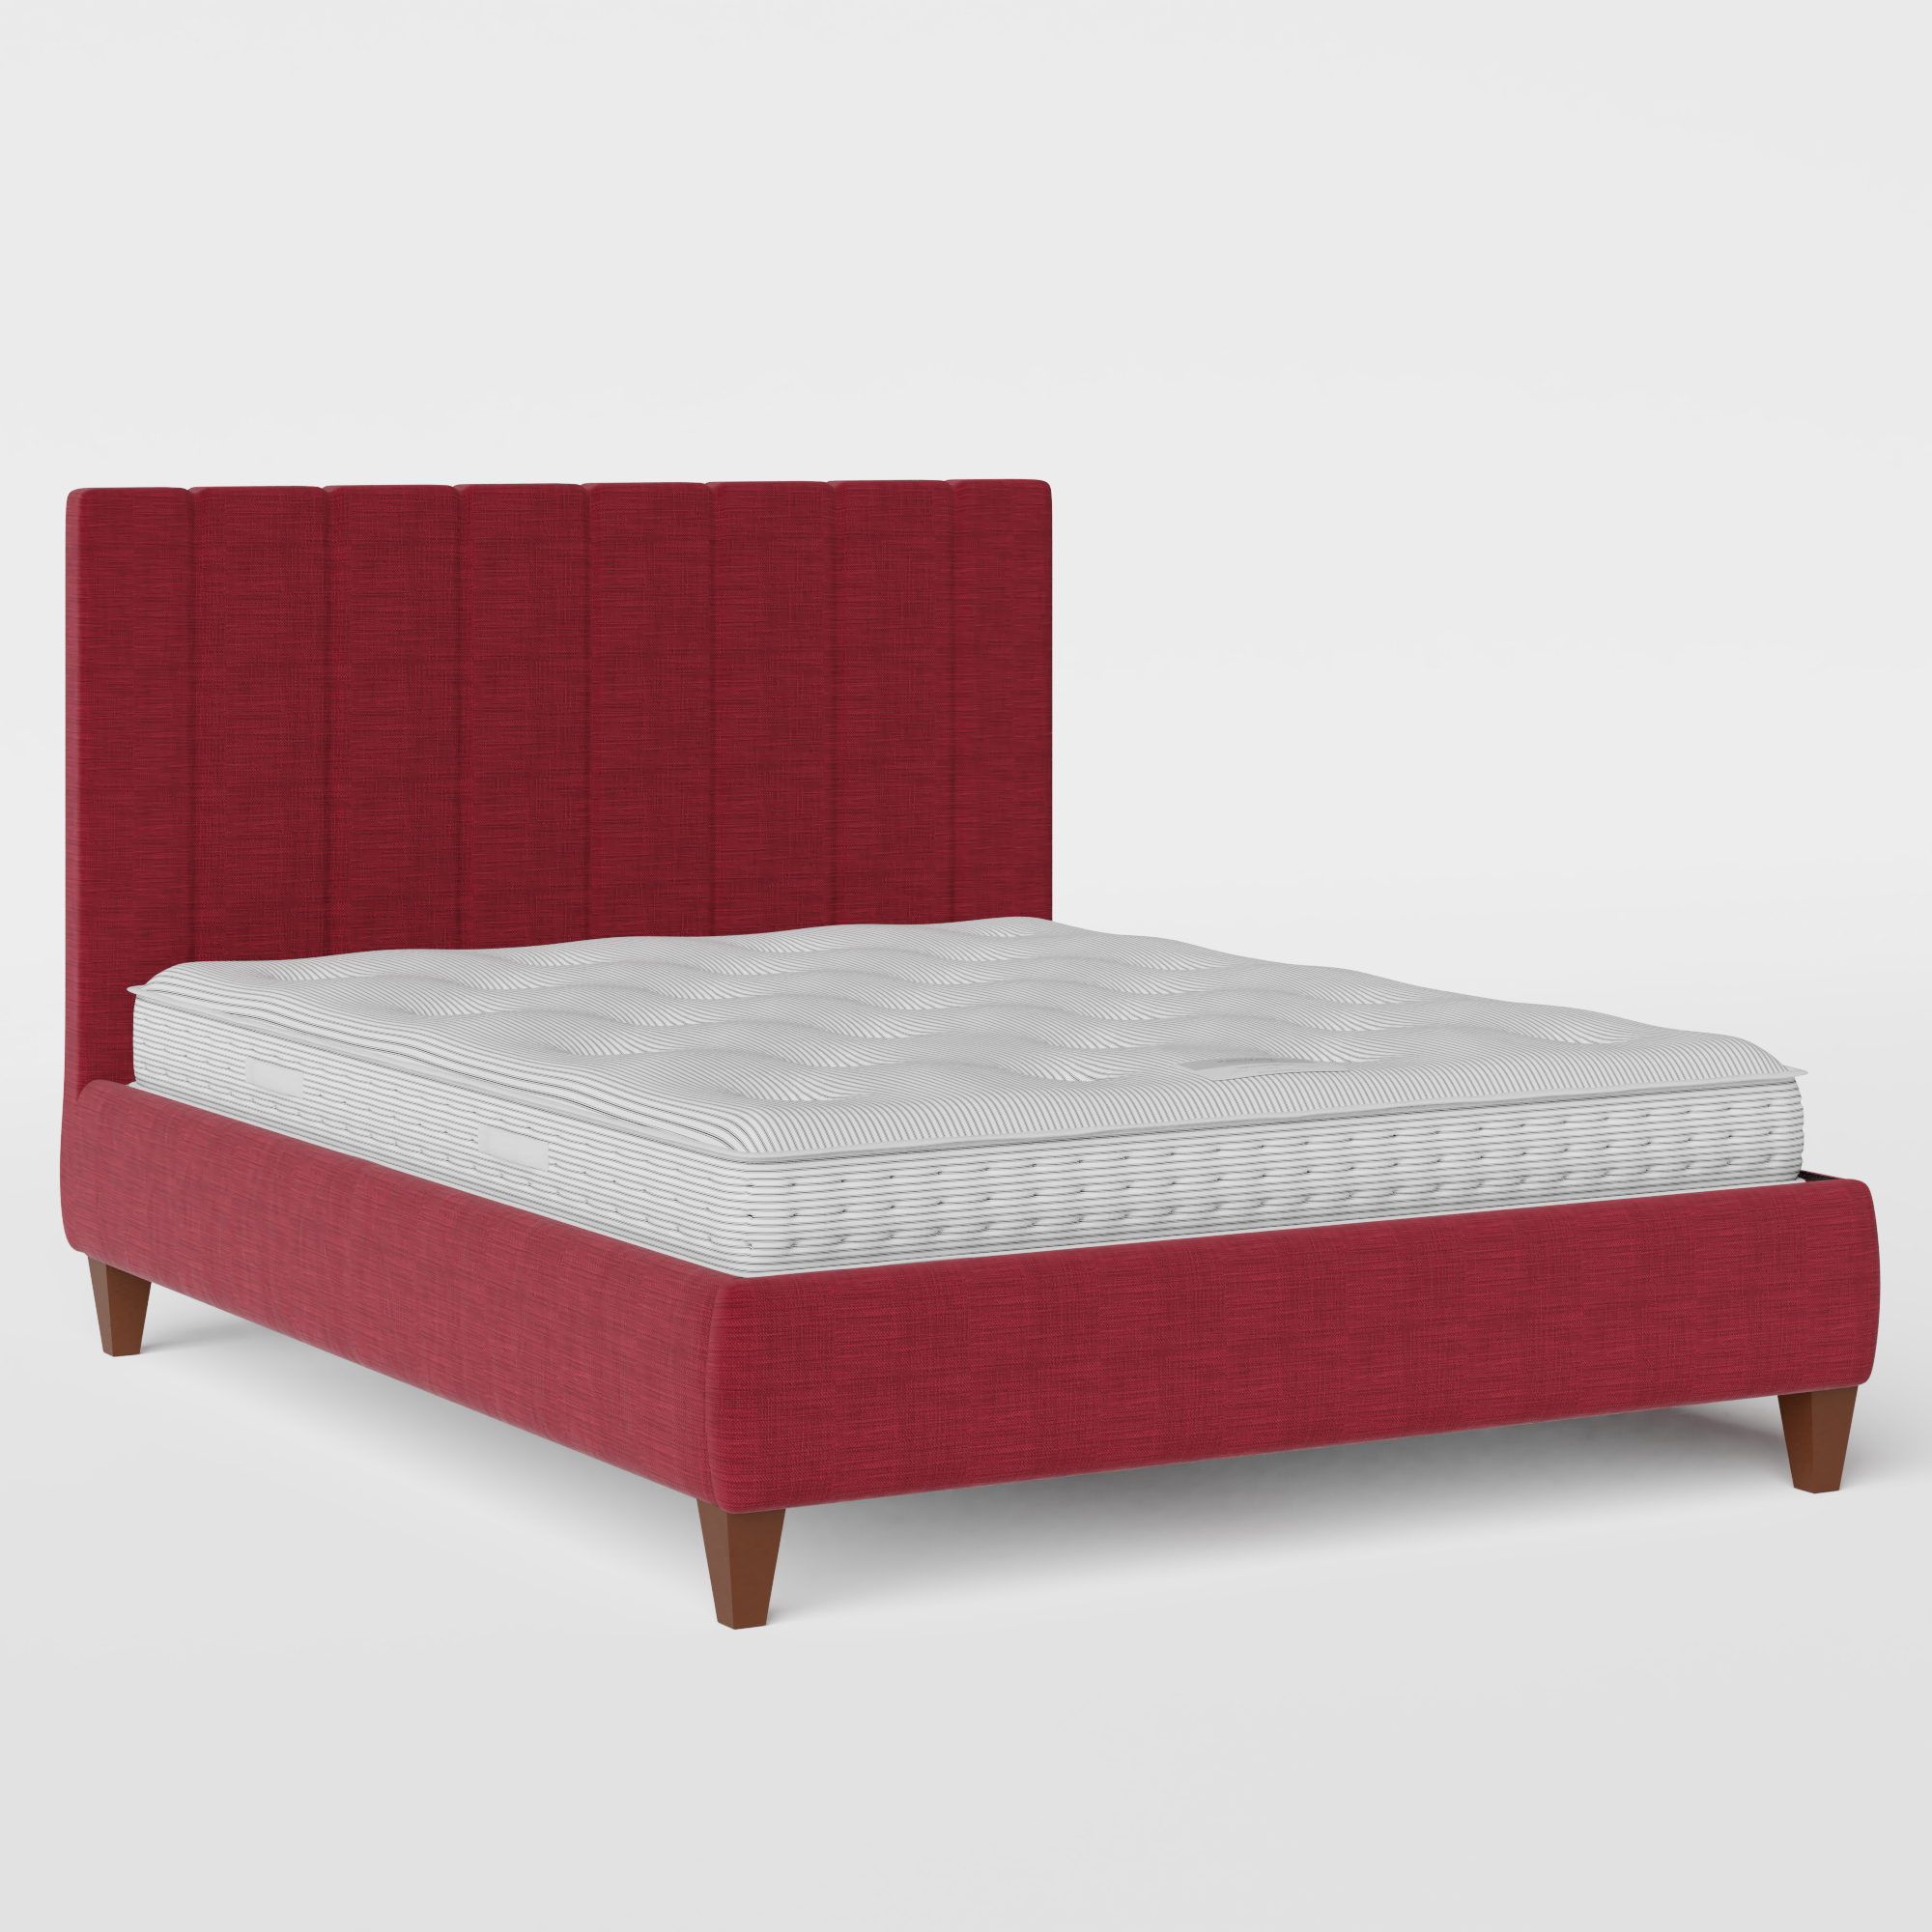 Yushan Pleated upholstered bed in cherry fabric